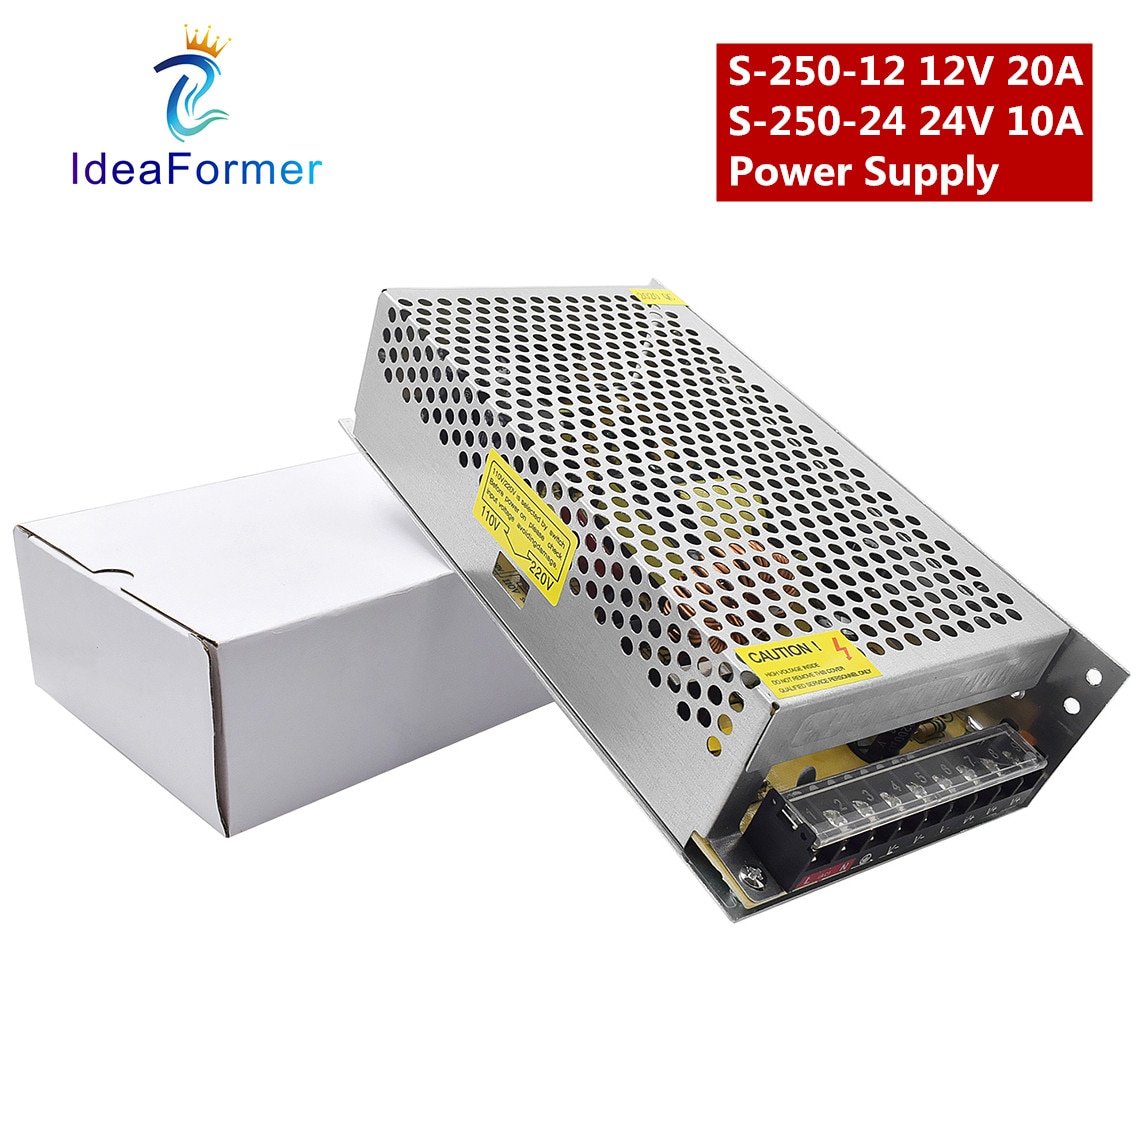 120/250W Transformers Voeding S-120-12 S-120-24 S-250-12 S-250-24 12/24V Huidige 5A/10A/20A Rgb Led Strip & 3D Printer Onderdelen.